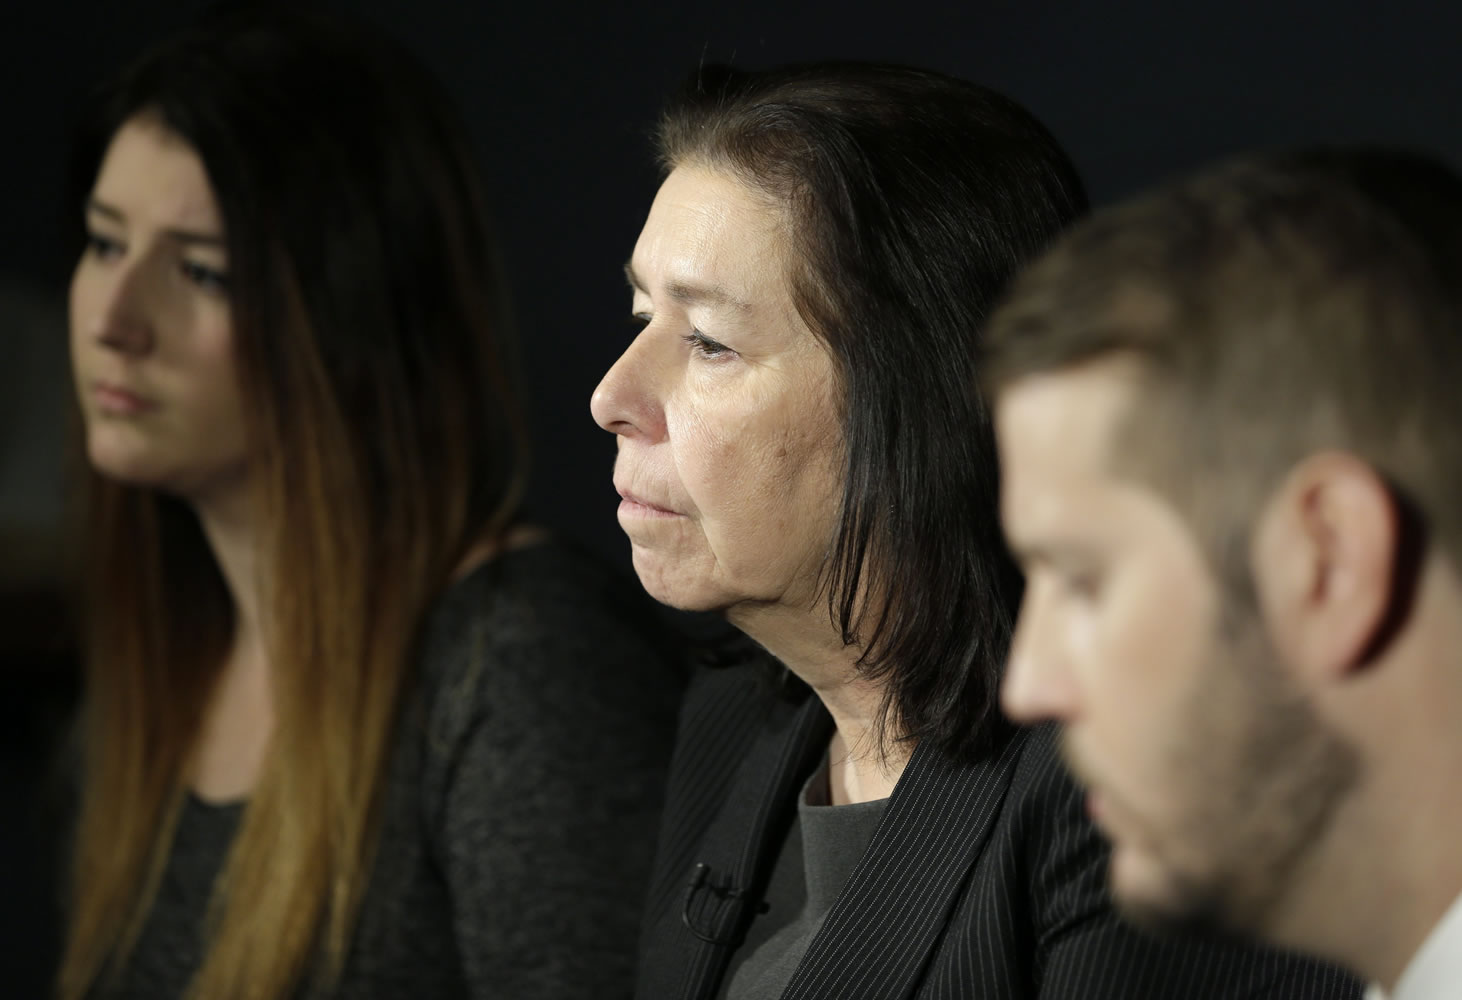 Christine Levinson, center, wife of Robert Levinson, and her children, Dan and Samantha Levinson, talk to reporters Monday in New York. Levinson disappeared in Iran in 2007.